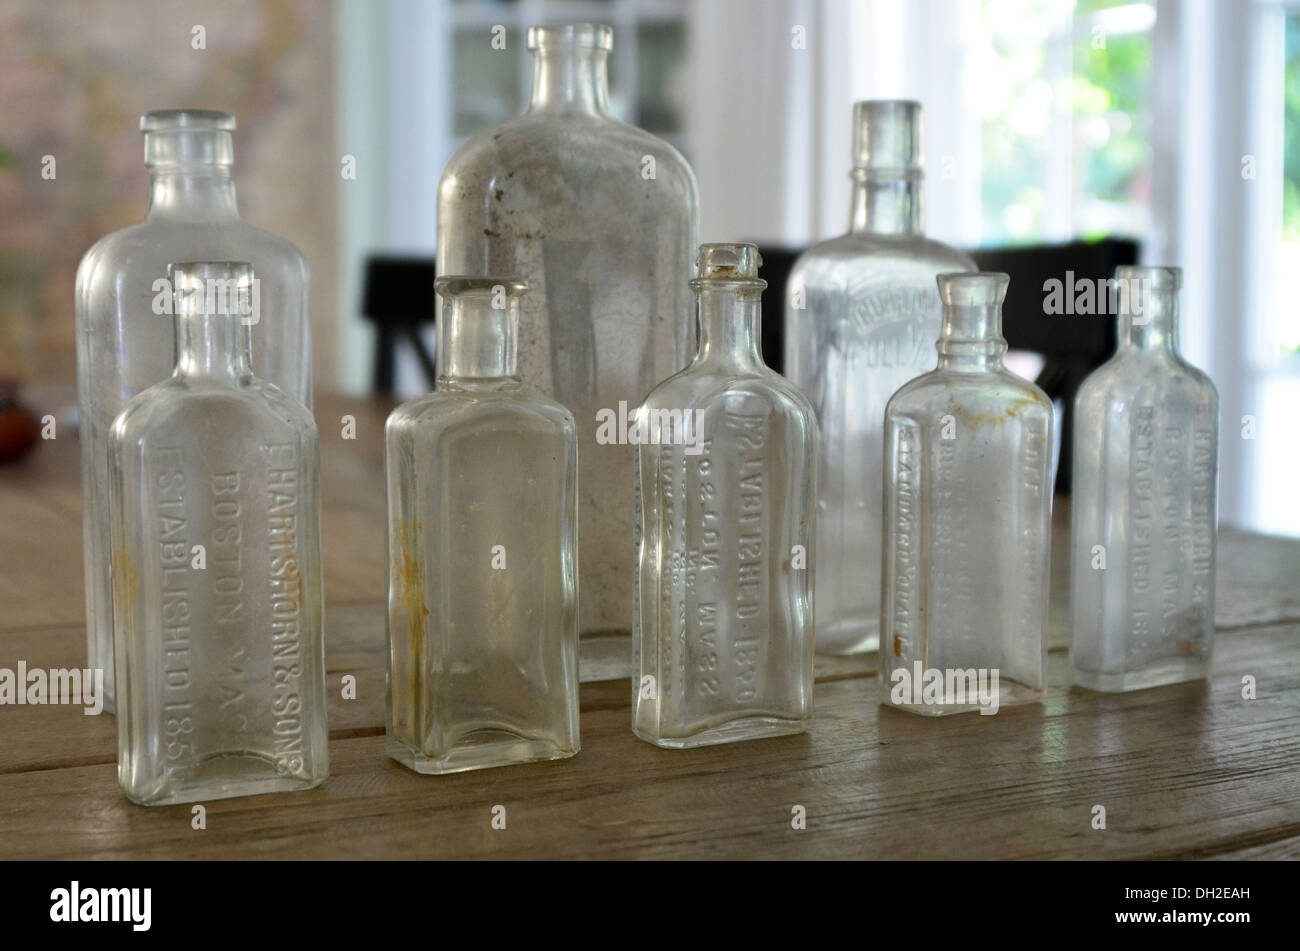 Antique bottles lined up on a wooden dining table with a window in the distance. Stock Photo